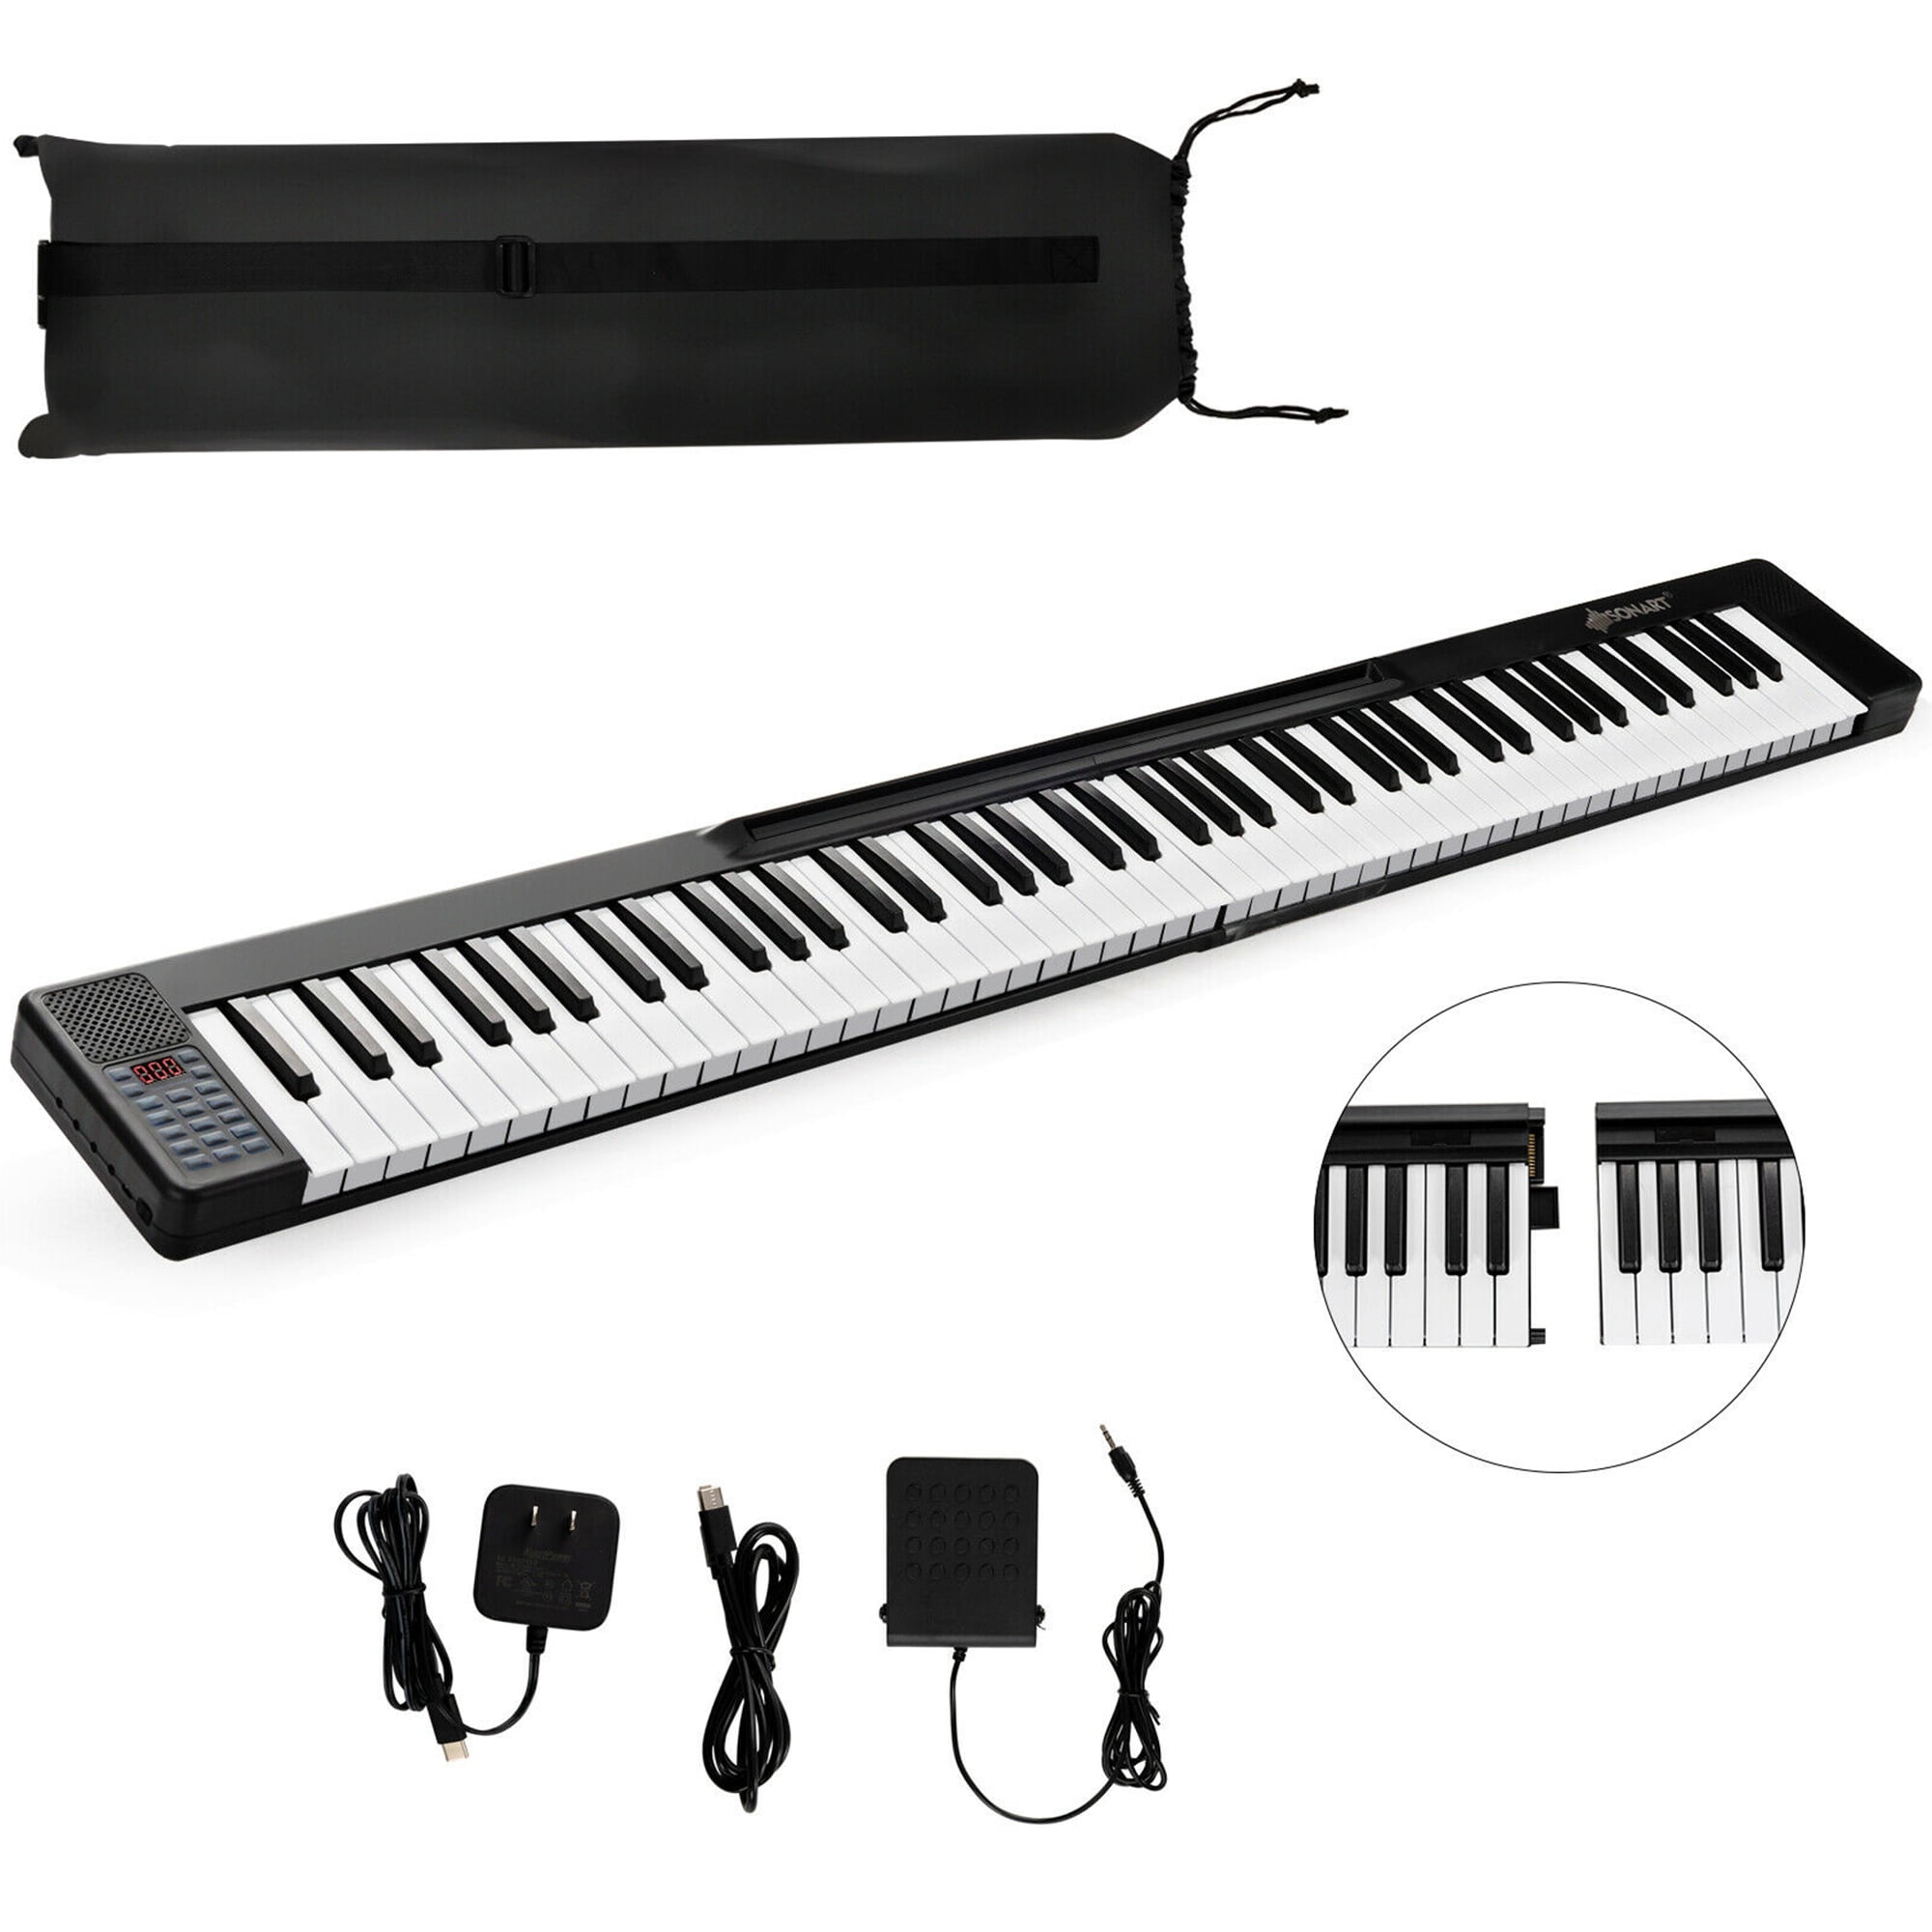 Finger Dance Folding Piano Electric Piano Keyboard with Stand Full Size Upgrade Wood Grain Touch Sensitive 88 Keys Digital Piano with Bluetooth MIDI Portable Piano Keyboard for Beginners （Deep Black） 